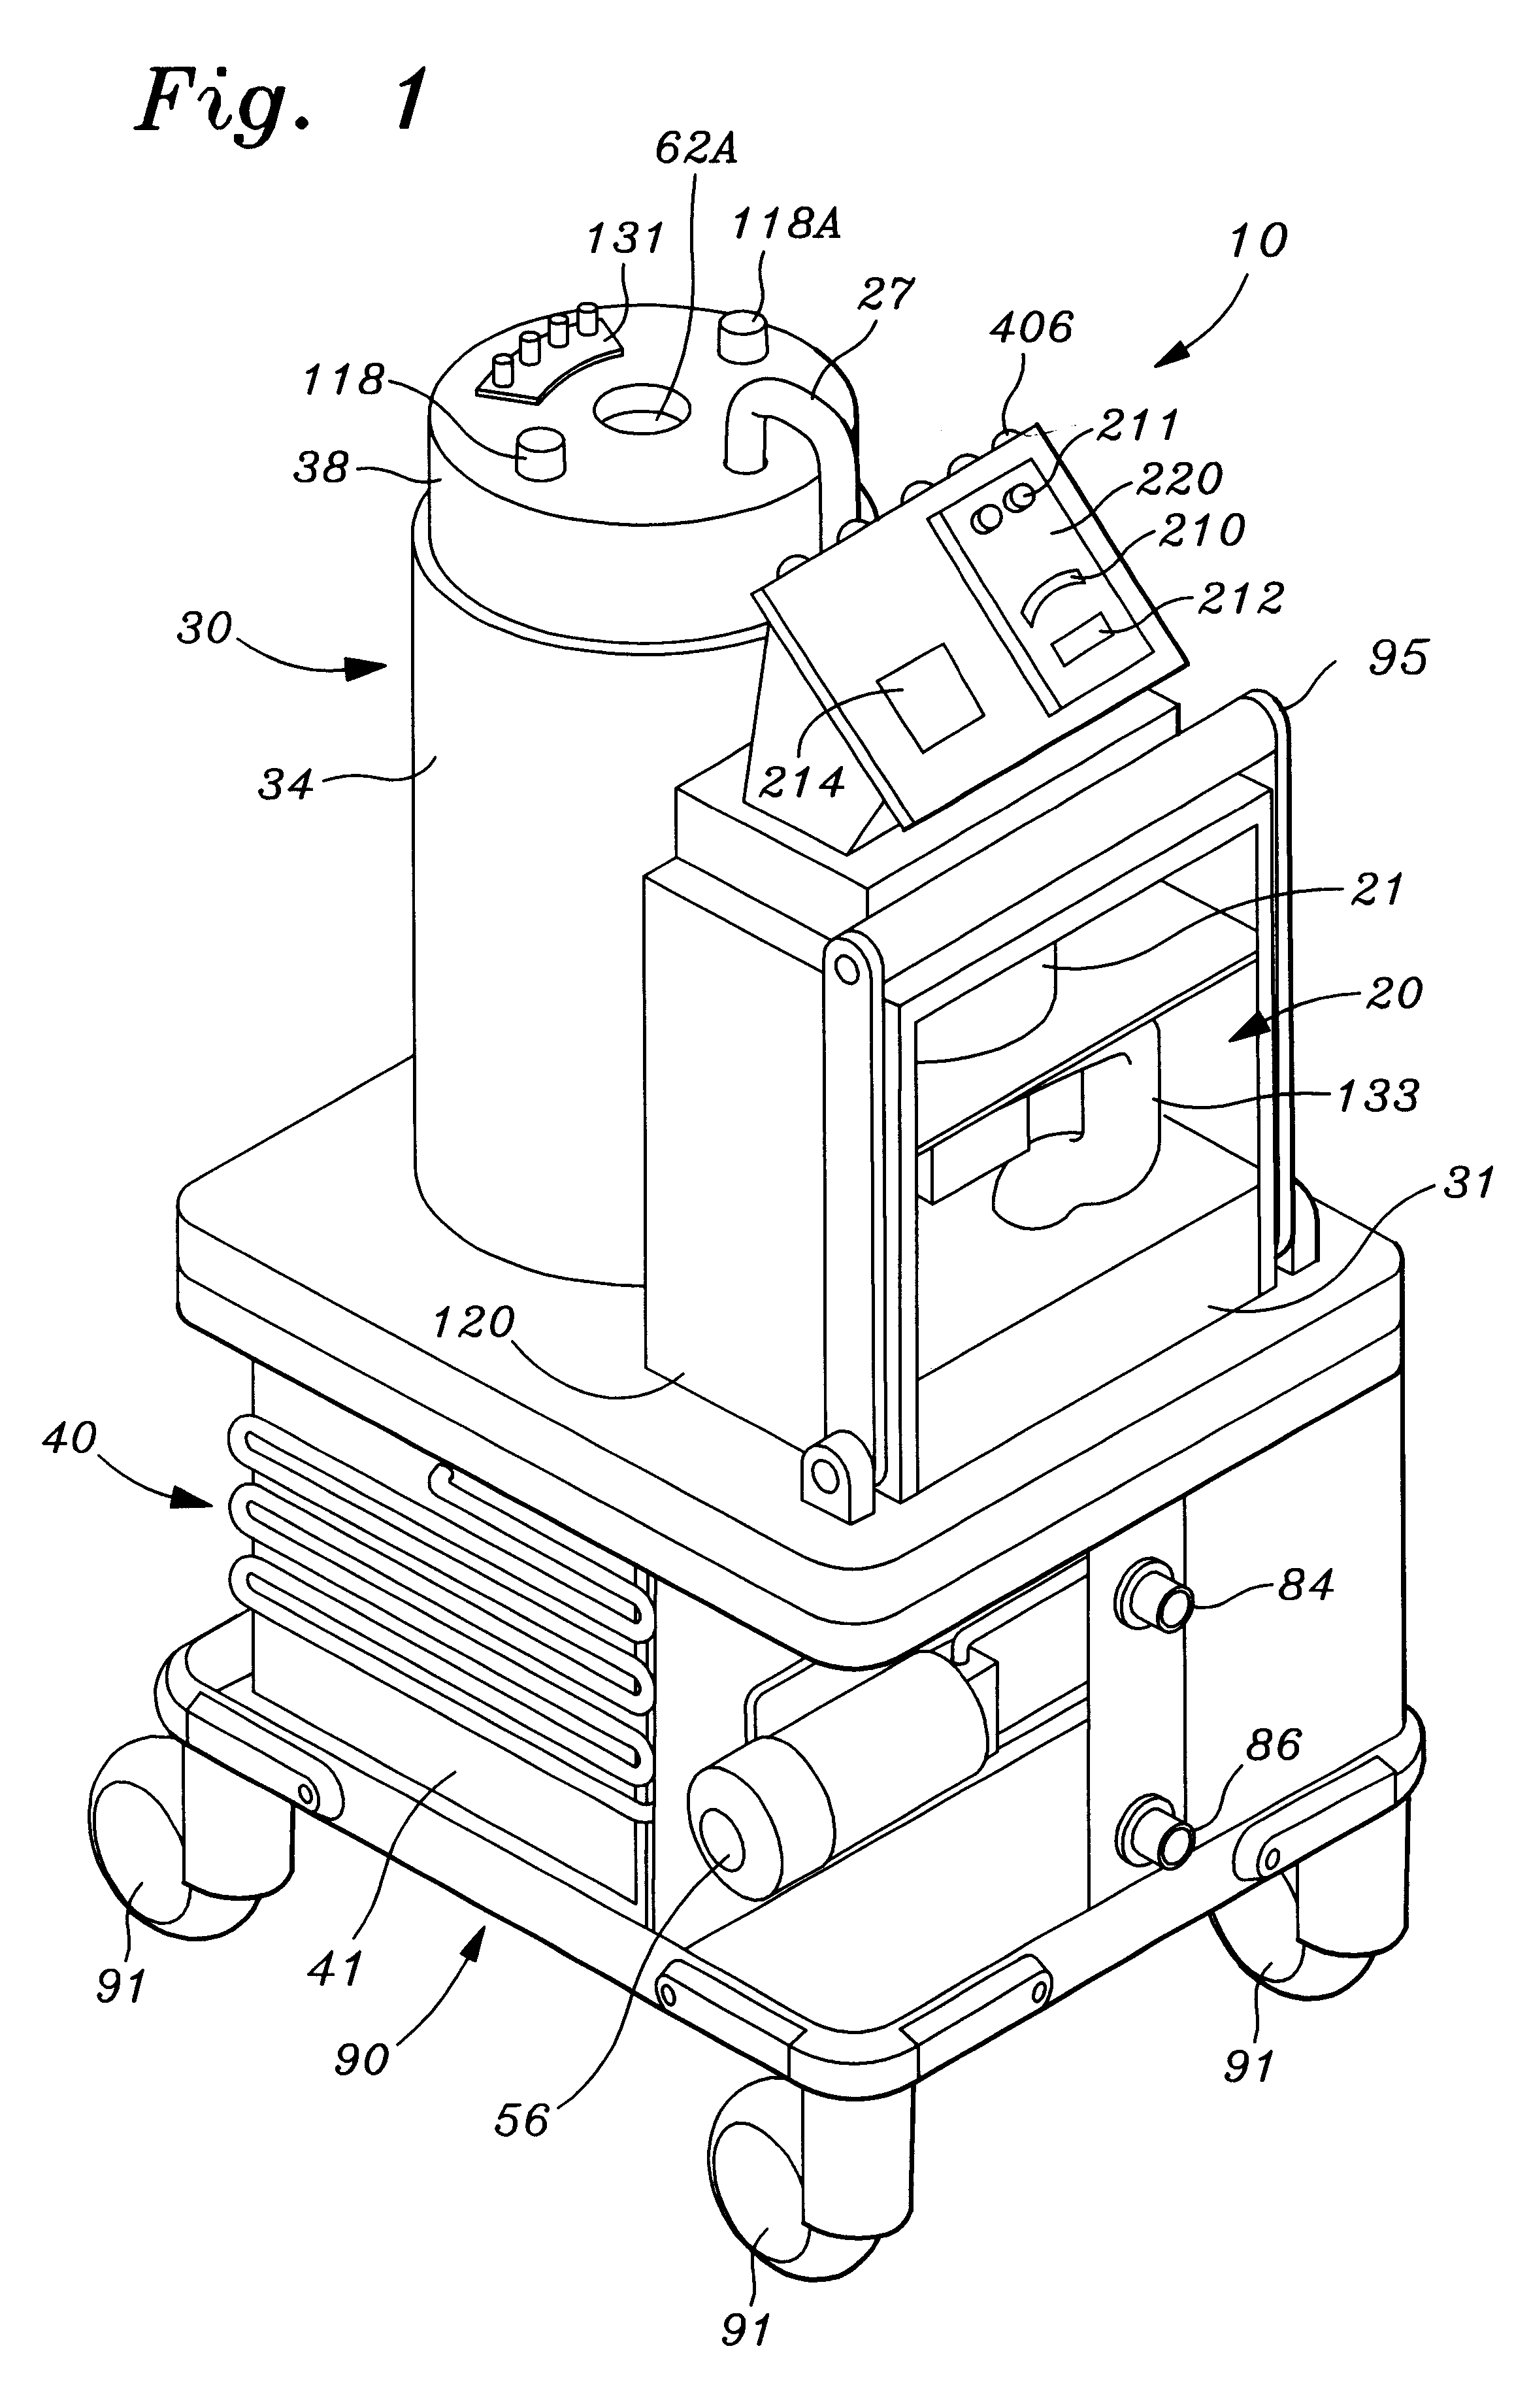 Surgical waste liquid and smoke disposal system